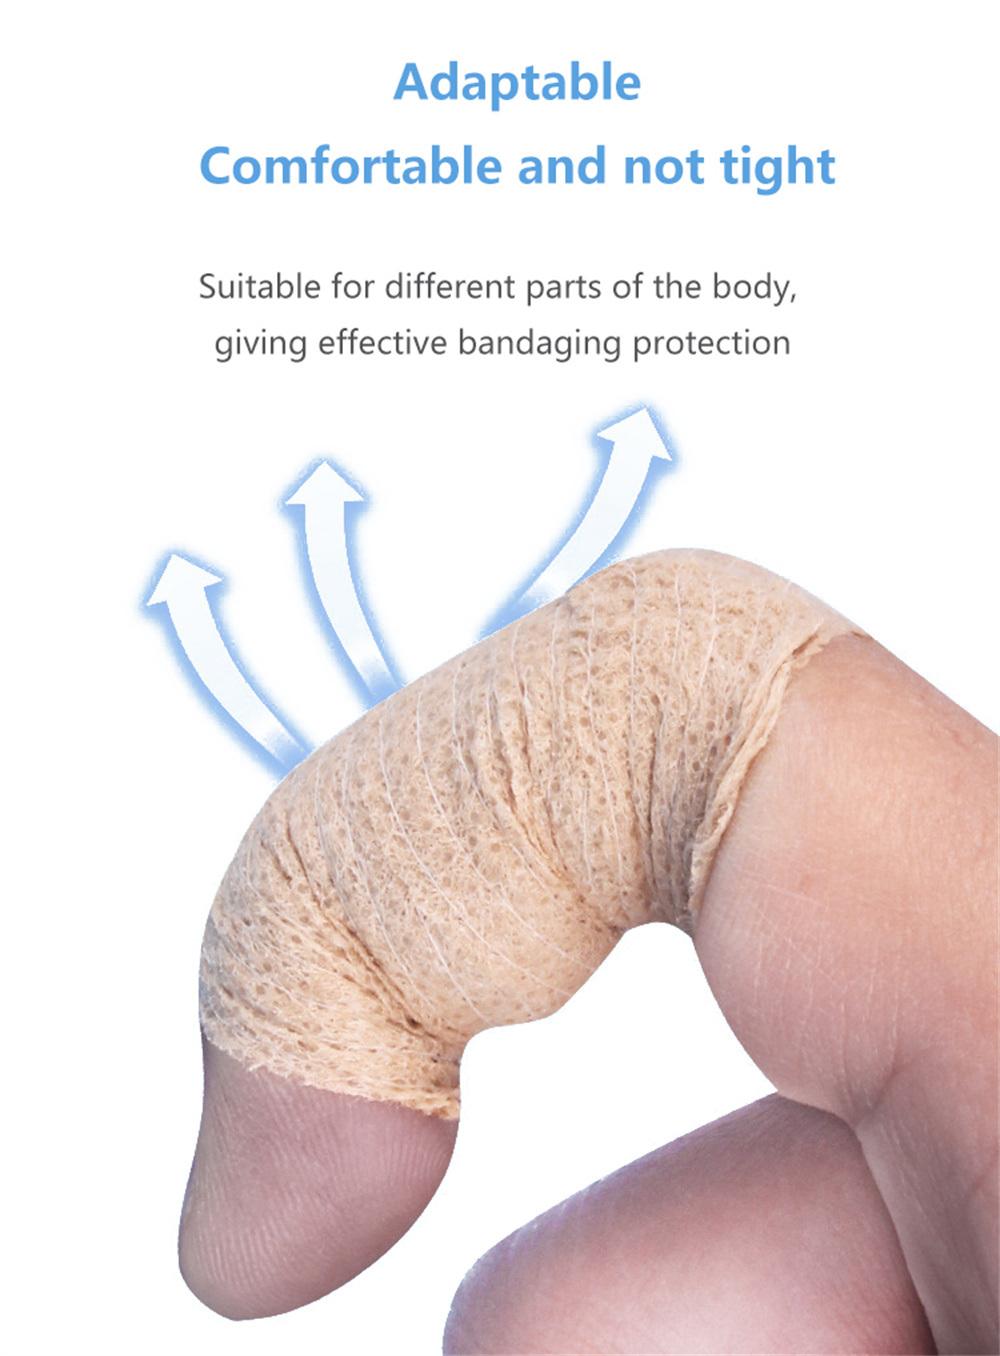 Pet Vet Wrap Cohesive Bandages Self Adhesive Bandage Non-Woven Elastic Sports Bandages for Wrist and Ankle Sprains Swelling